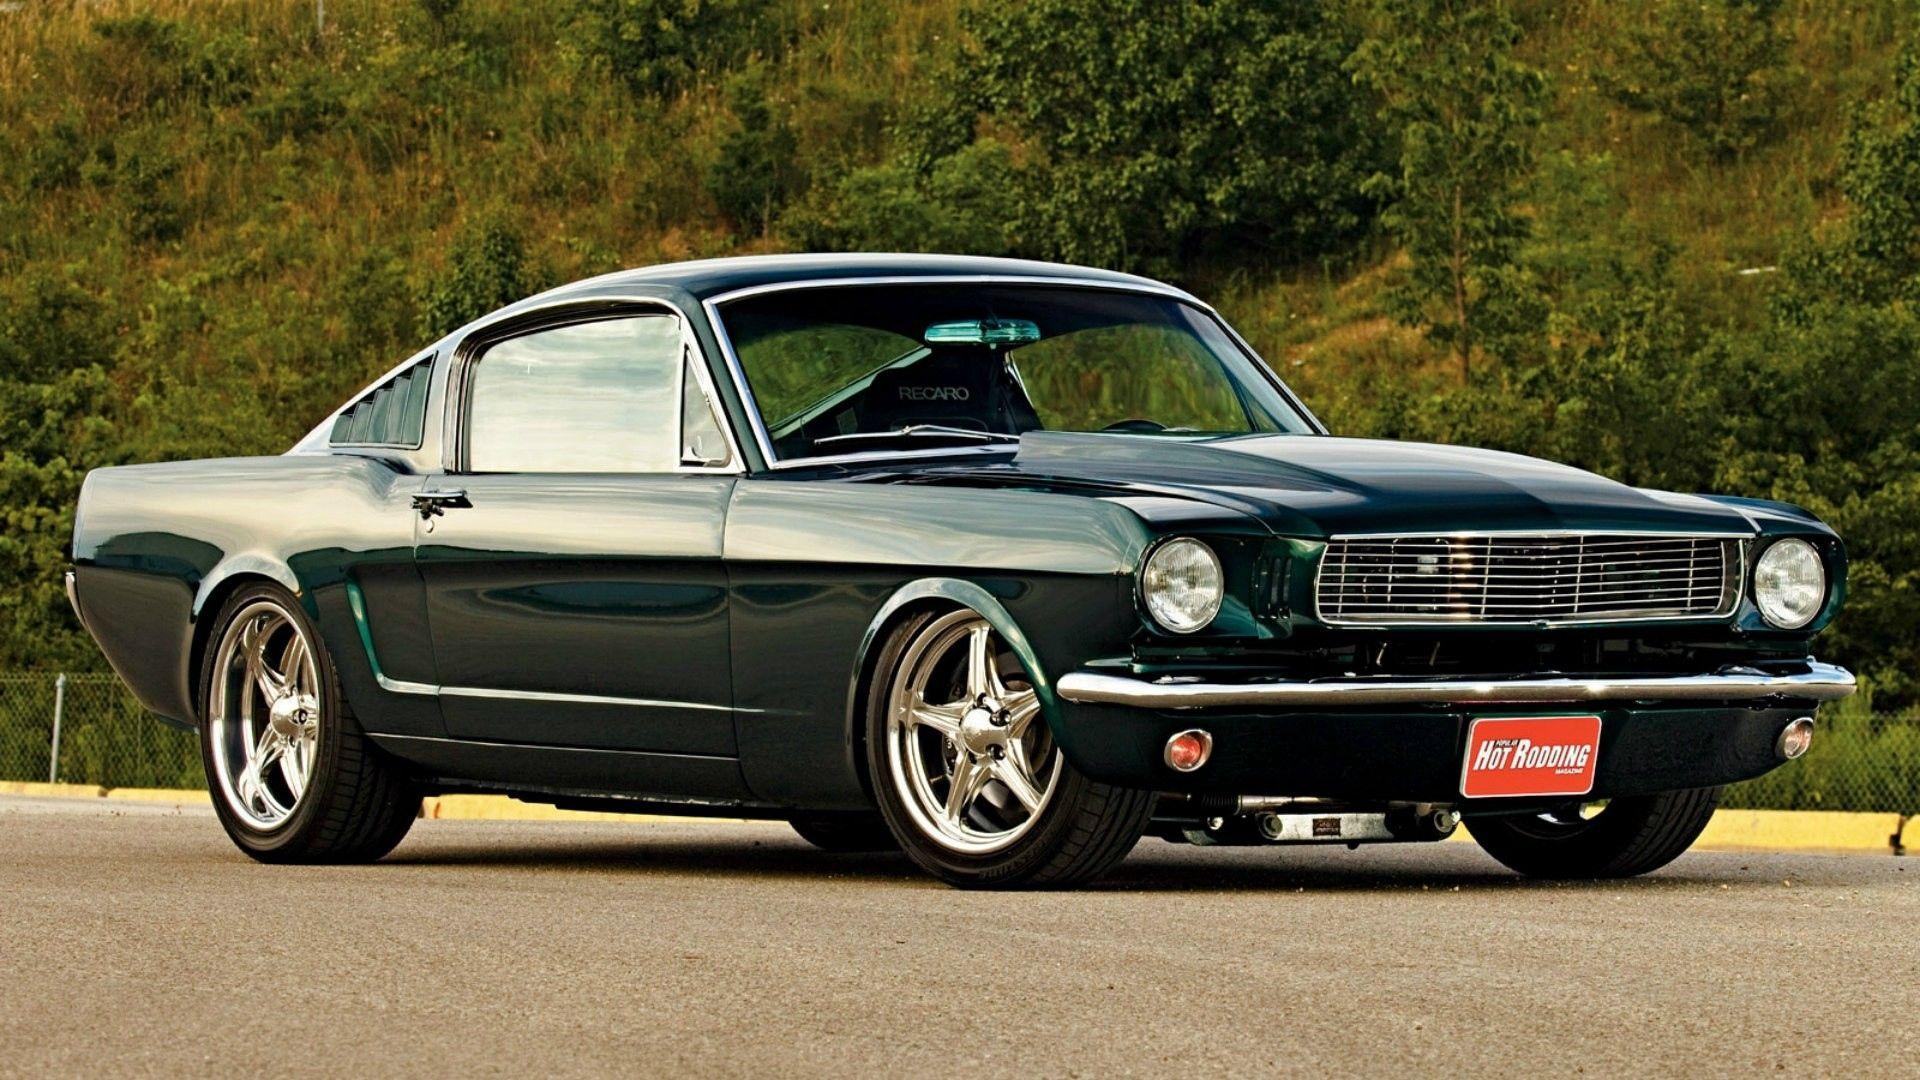 Download wallpaper 1920x1080 ford, muscle car, mustang, fastback